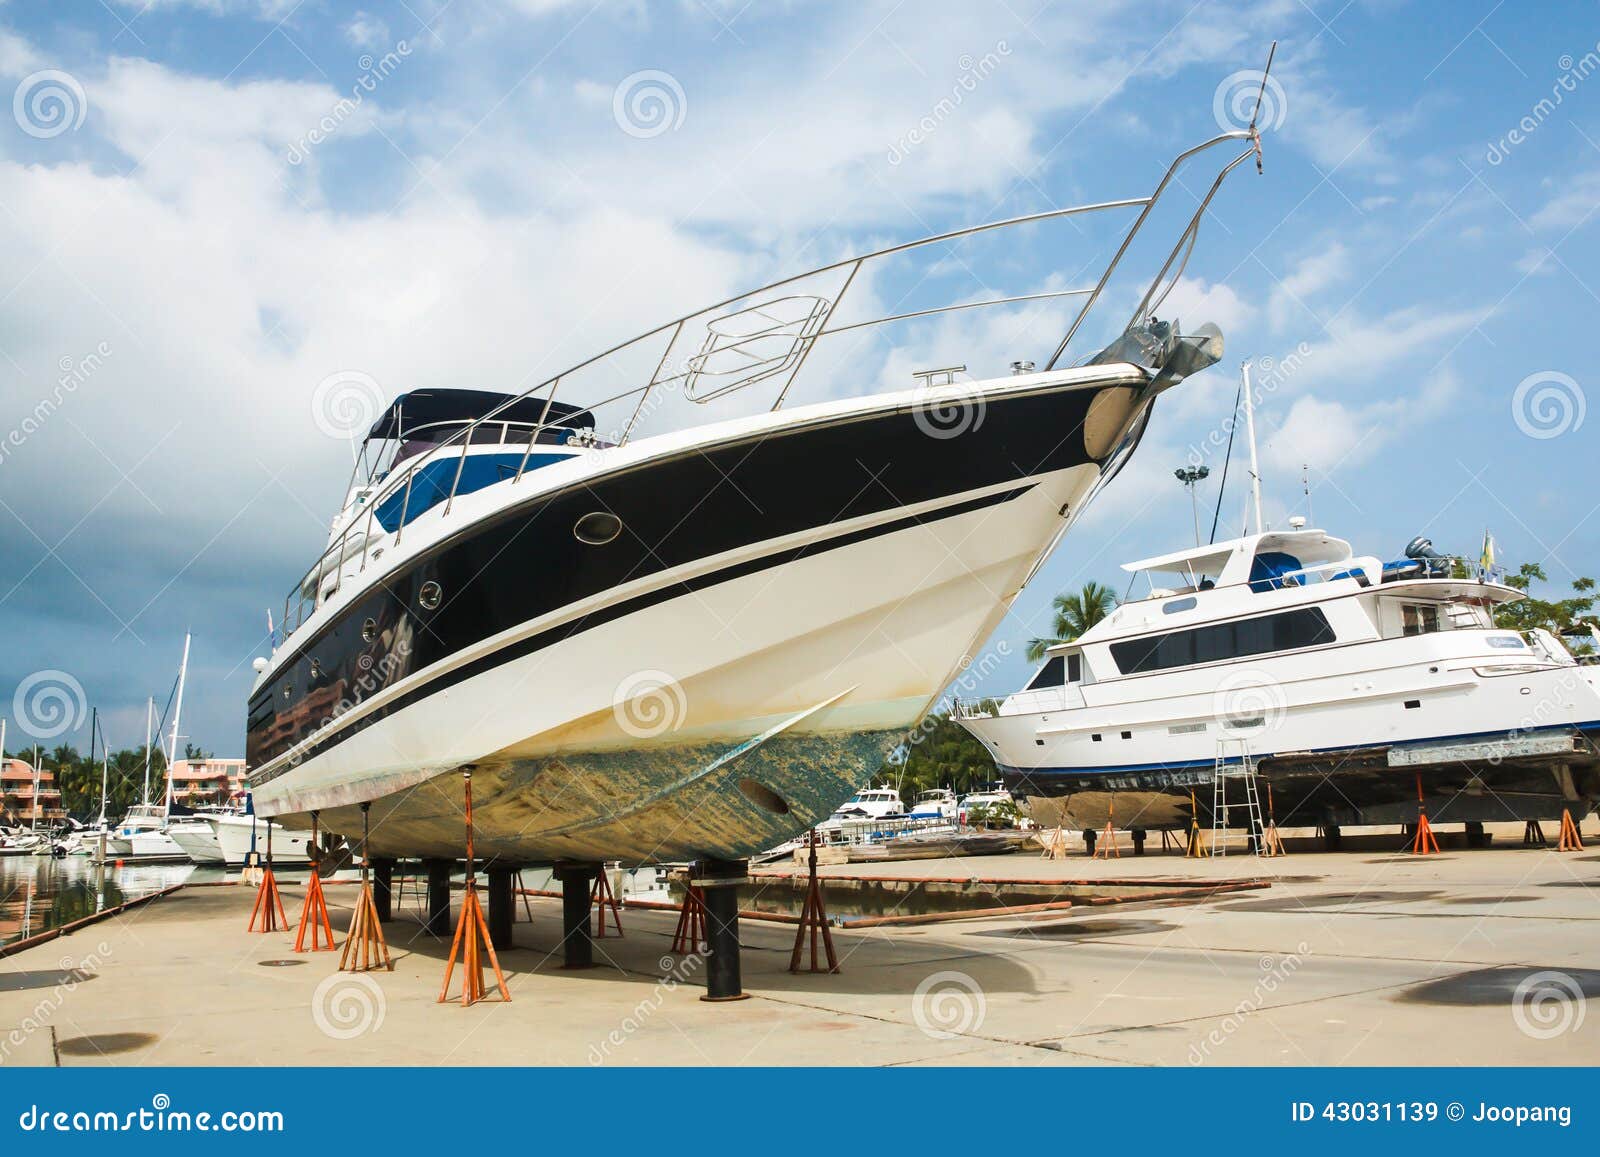 Boat on stands stock image. Image of sport, heavy, outdoor ...